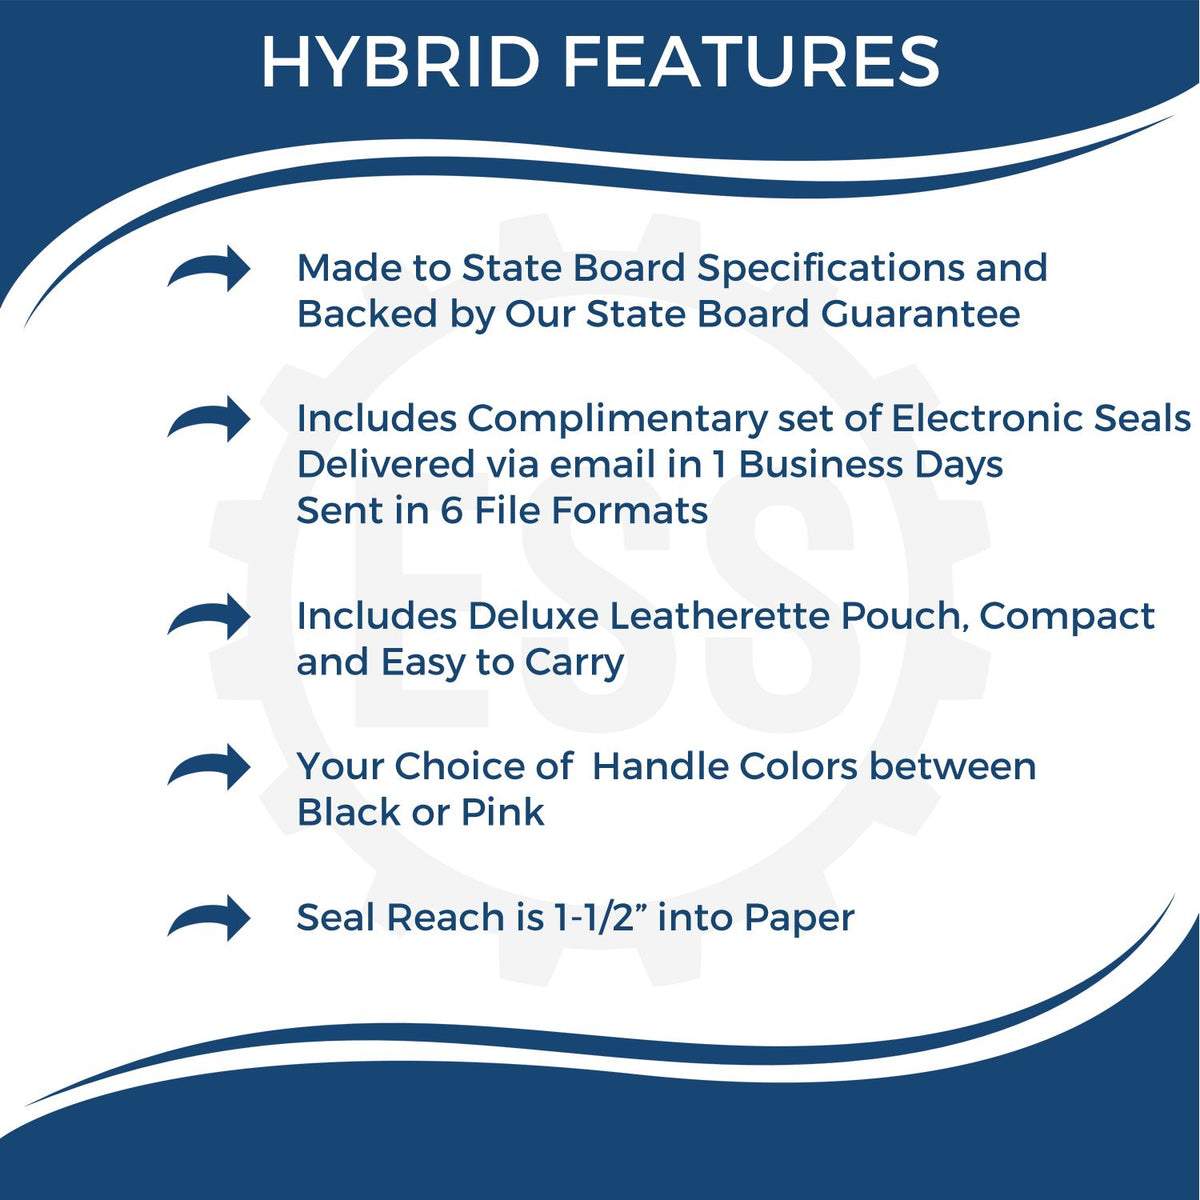 A picture of an infographic highlighting the selling points for the Hybrid Montana Land Surveyor Seal